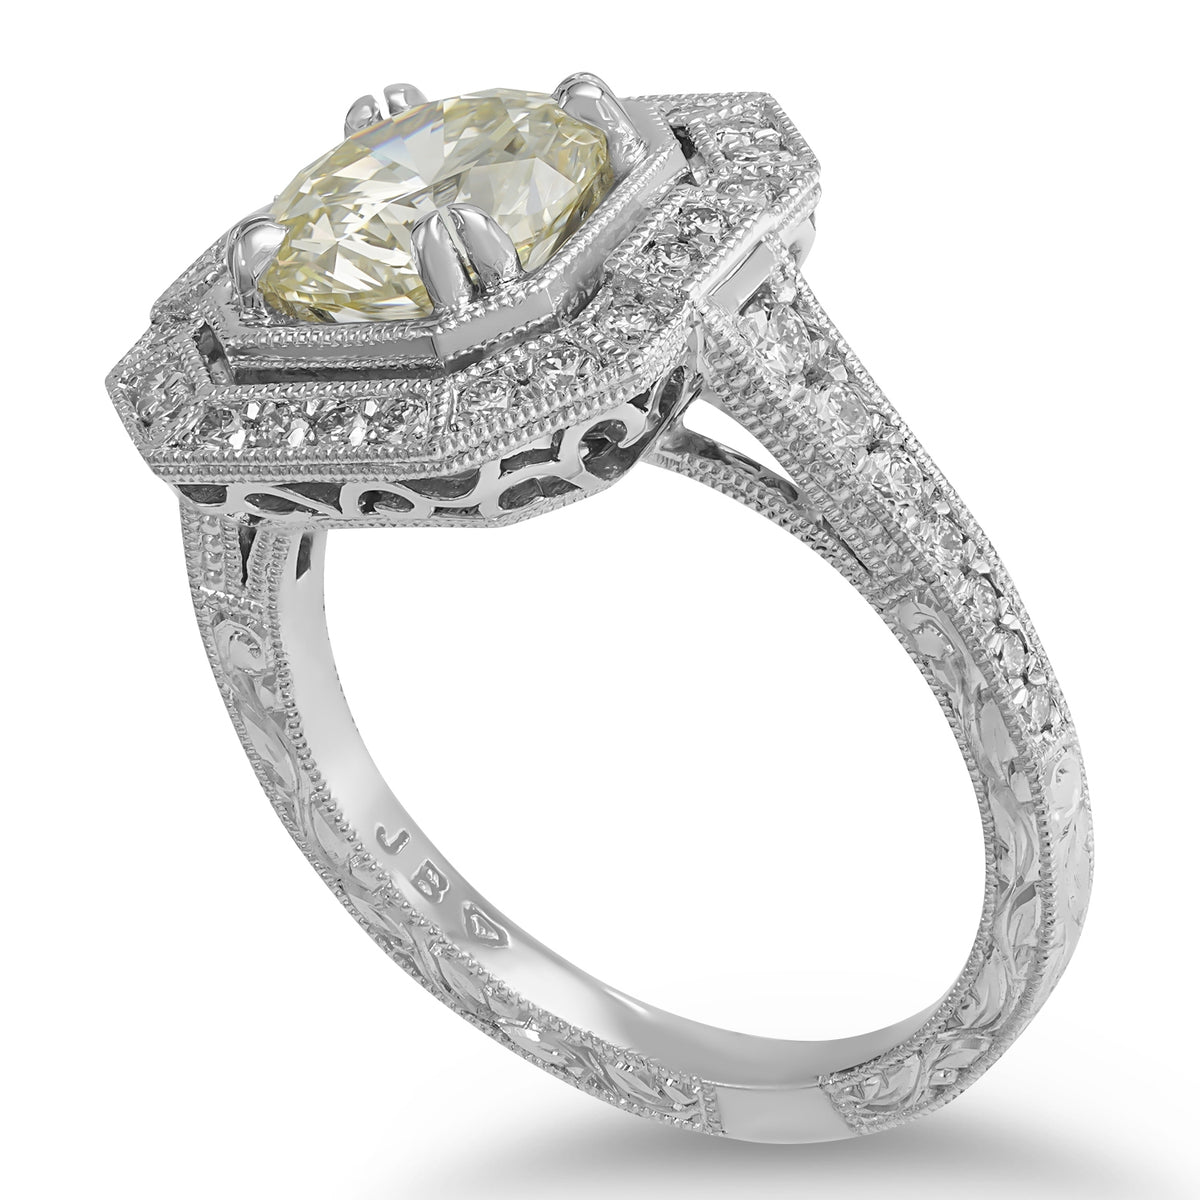 Pale Yellow Diamond in Engraved Ring